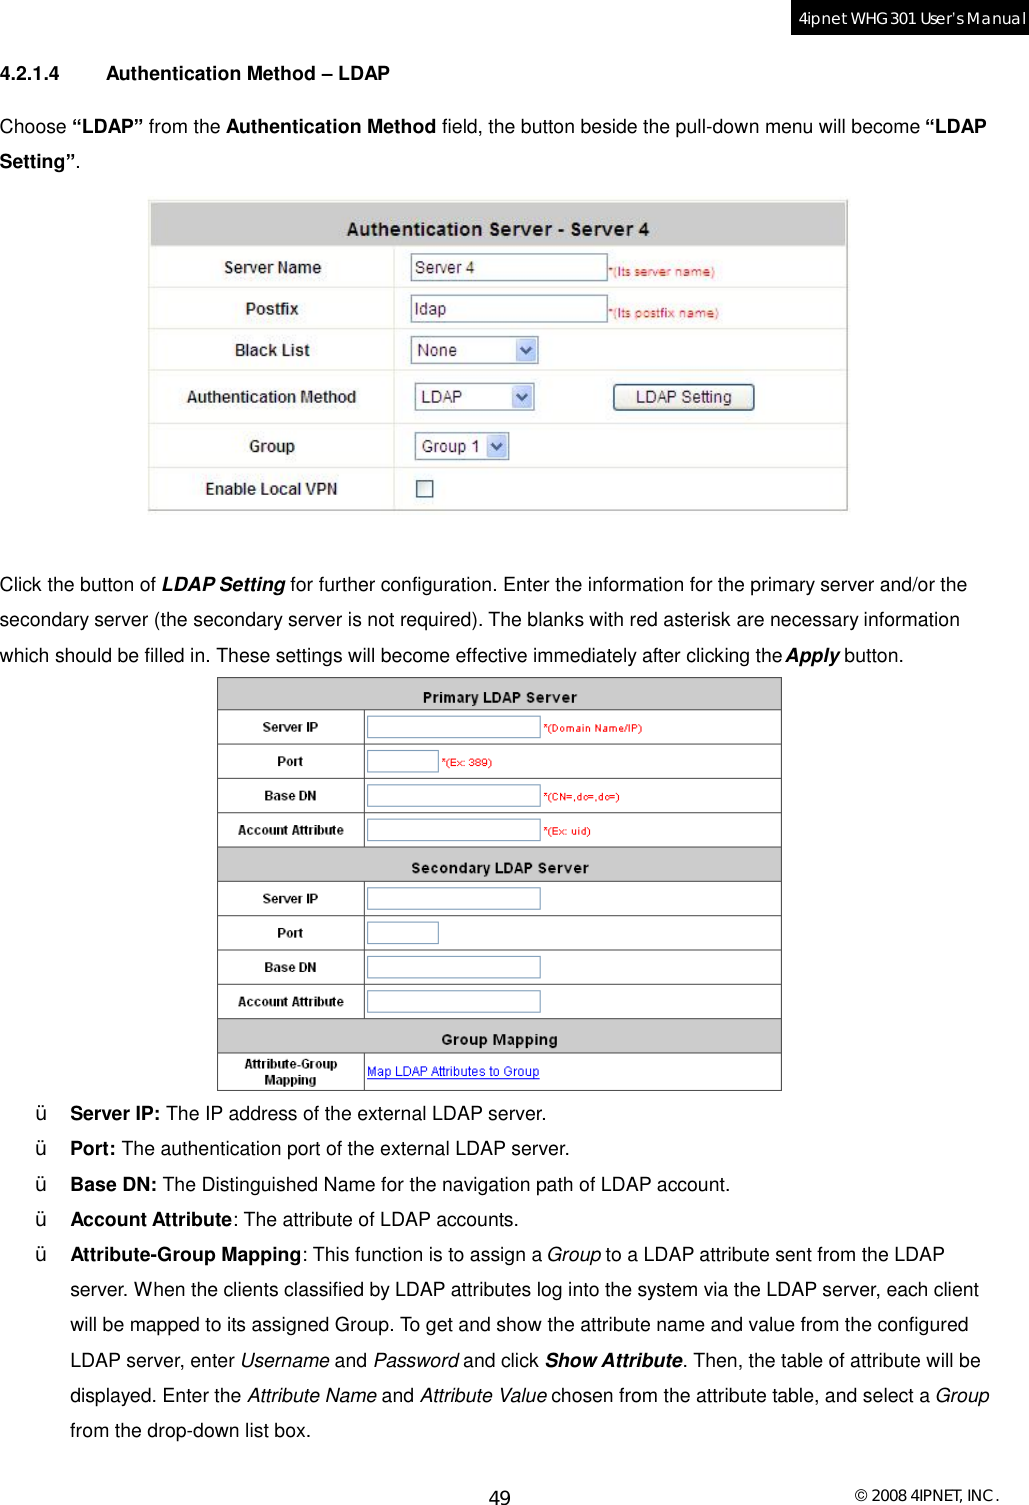  © 2008 4IPNET, INC. 49 4ipnet WHG301 User’s Manual  4.2.1.4 Authentication Method – LDAP Choose “LDAP” from the Authentication Method field, the button beside the pull-down menu will become “LDAP Setting”.    Click the button of LDAP Setting for further configuration. Enter the information for the primary server and/or the secondary server (the secondary server is not required). The blanks with red asterisk are necessary information which should be filled in. These settings will become effective immediately after clicking the Apply button.  Ÿ  Server IP: The IP address of the external LDAP server. Ÿ  Port: The authentication port of the external LDAP server. Ÿ  Base DN: The Distinguished Name for the navigation path of LDAP account. Ÿ  Account Attribute: The attribute of LDAP accounts. Ÿ  Attribute-Group Mapping: This function is to assign a Group to a LDAP attribute sent from the LDAP server. When the clients classified by LDAP attributes log into the system via the LDAP server, each client will be mapped to its assigned Group. To get and show the attribute name and value from the configured LDAP server, enter Username and Password and click Show Attribute. Then, the table of attribute will be displayed. Enter the Attribute Name and Attribute Value chosen from the attribute table, and select a Group from the drop-down list box.  